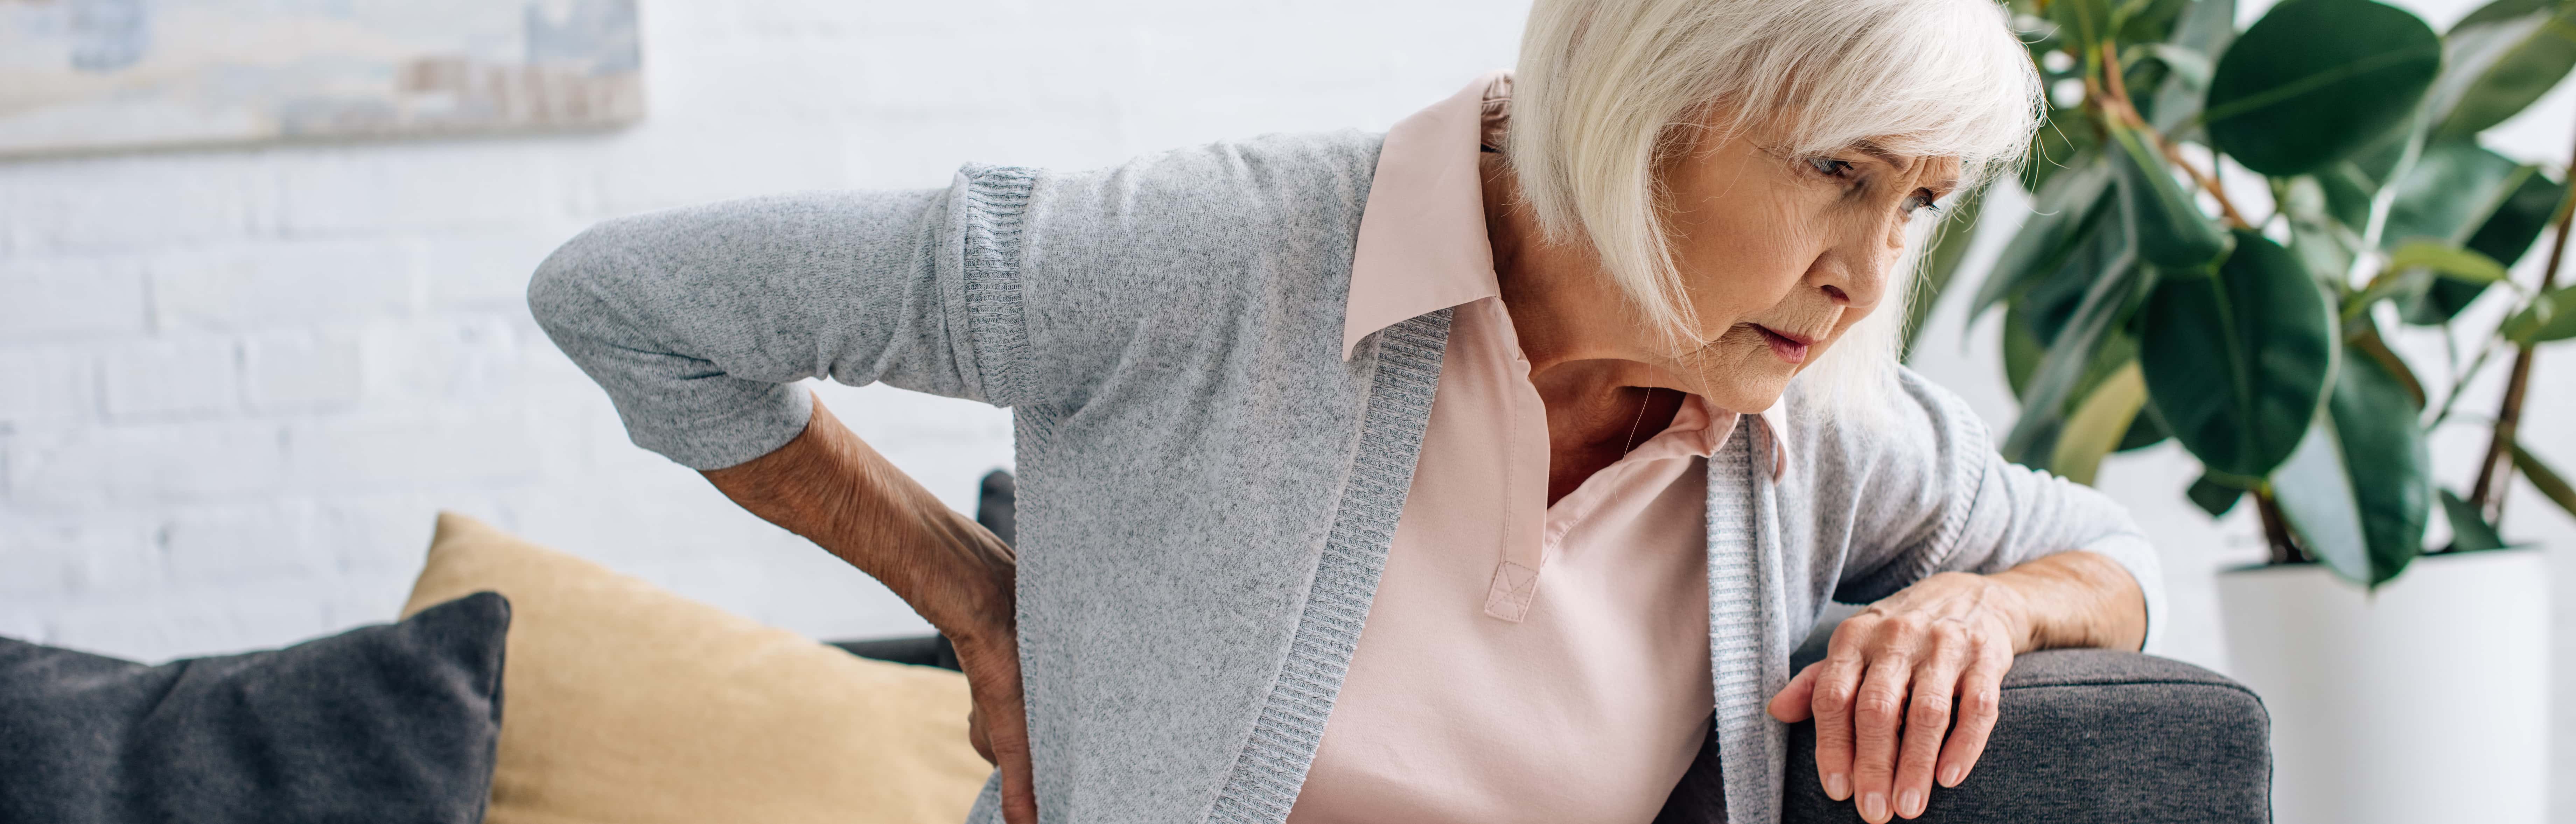 An elderly lady with pain from arthritis. She is wearing a grey sweater. Arthritis pain decreases movement. She looks stiff and in pain. osteoarthritis lumbar pain